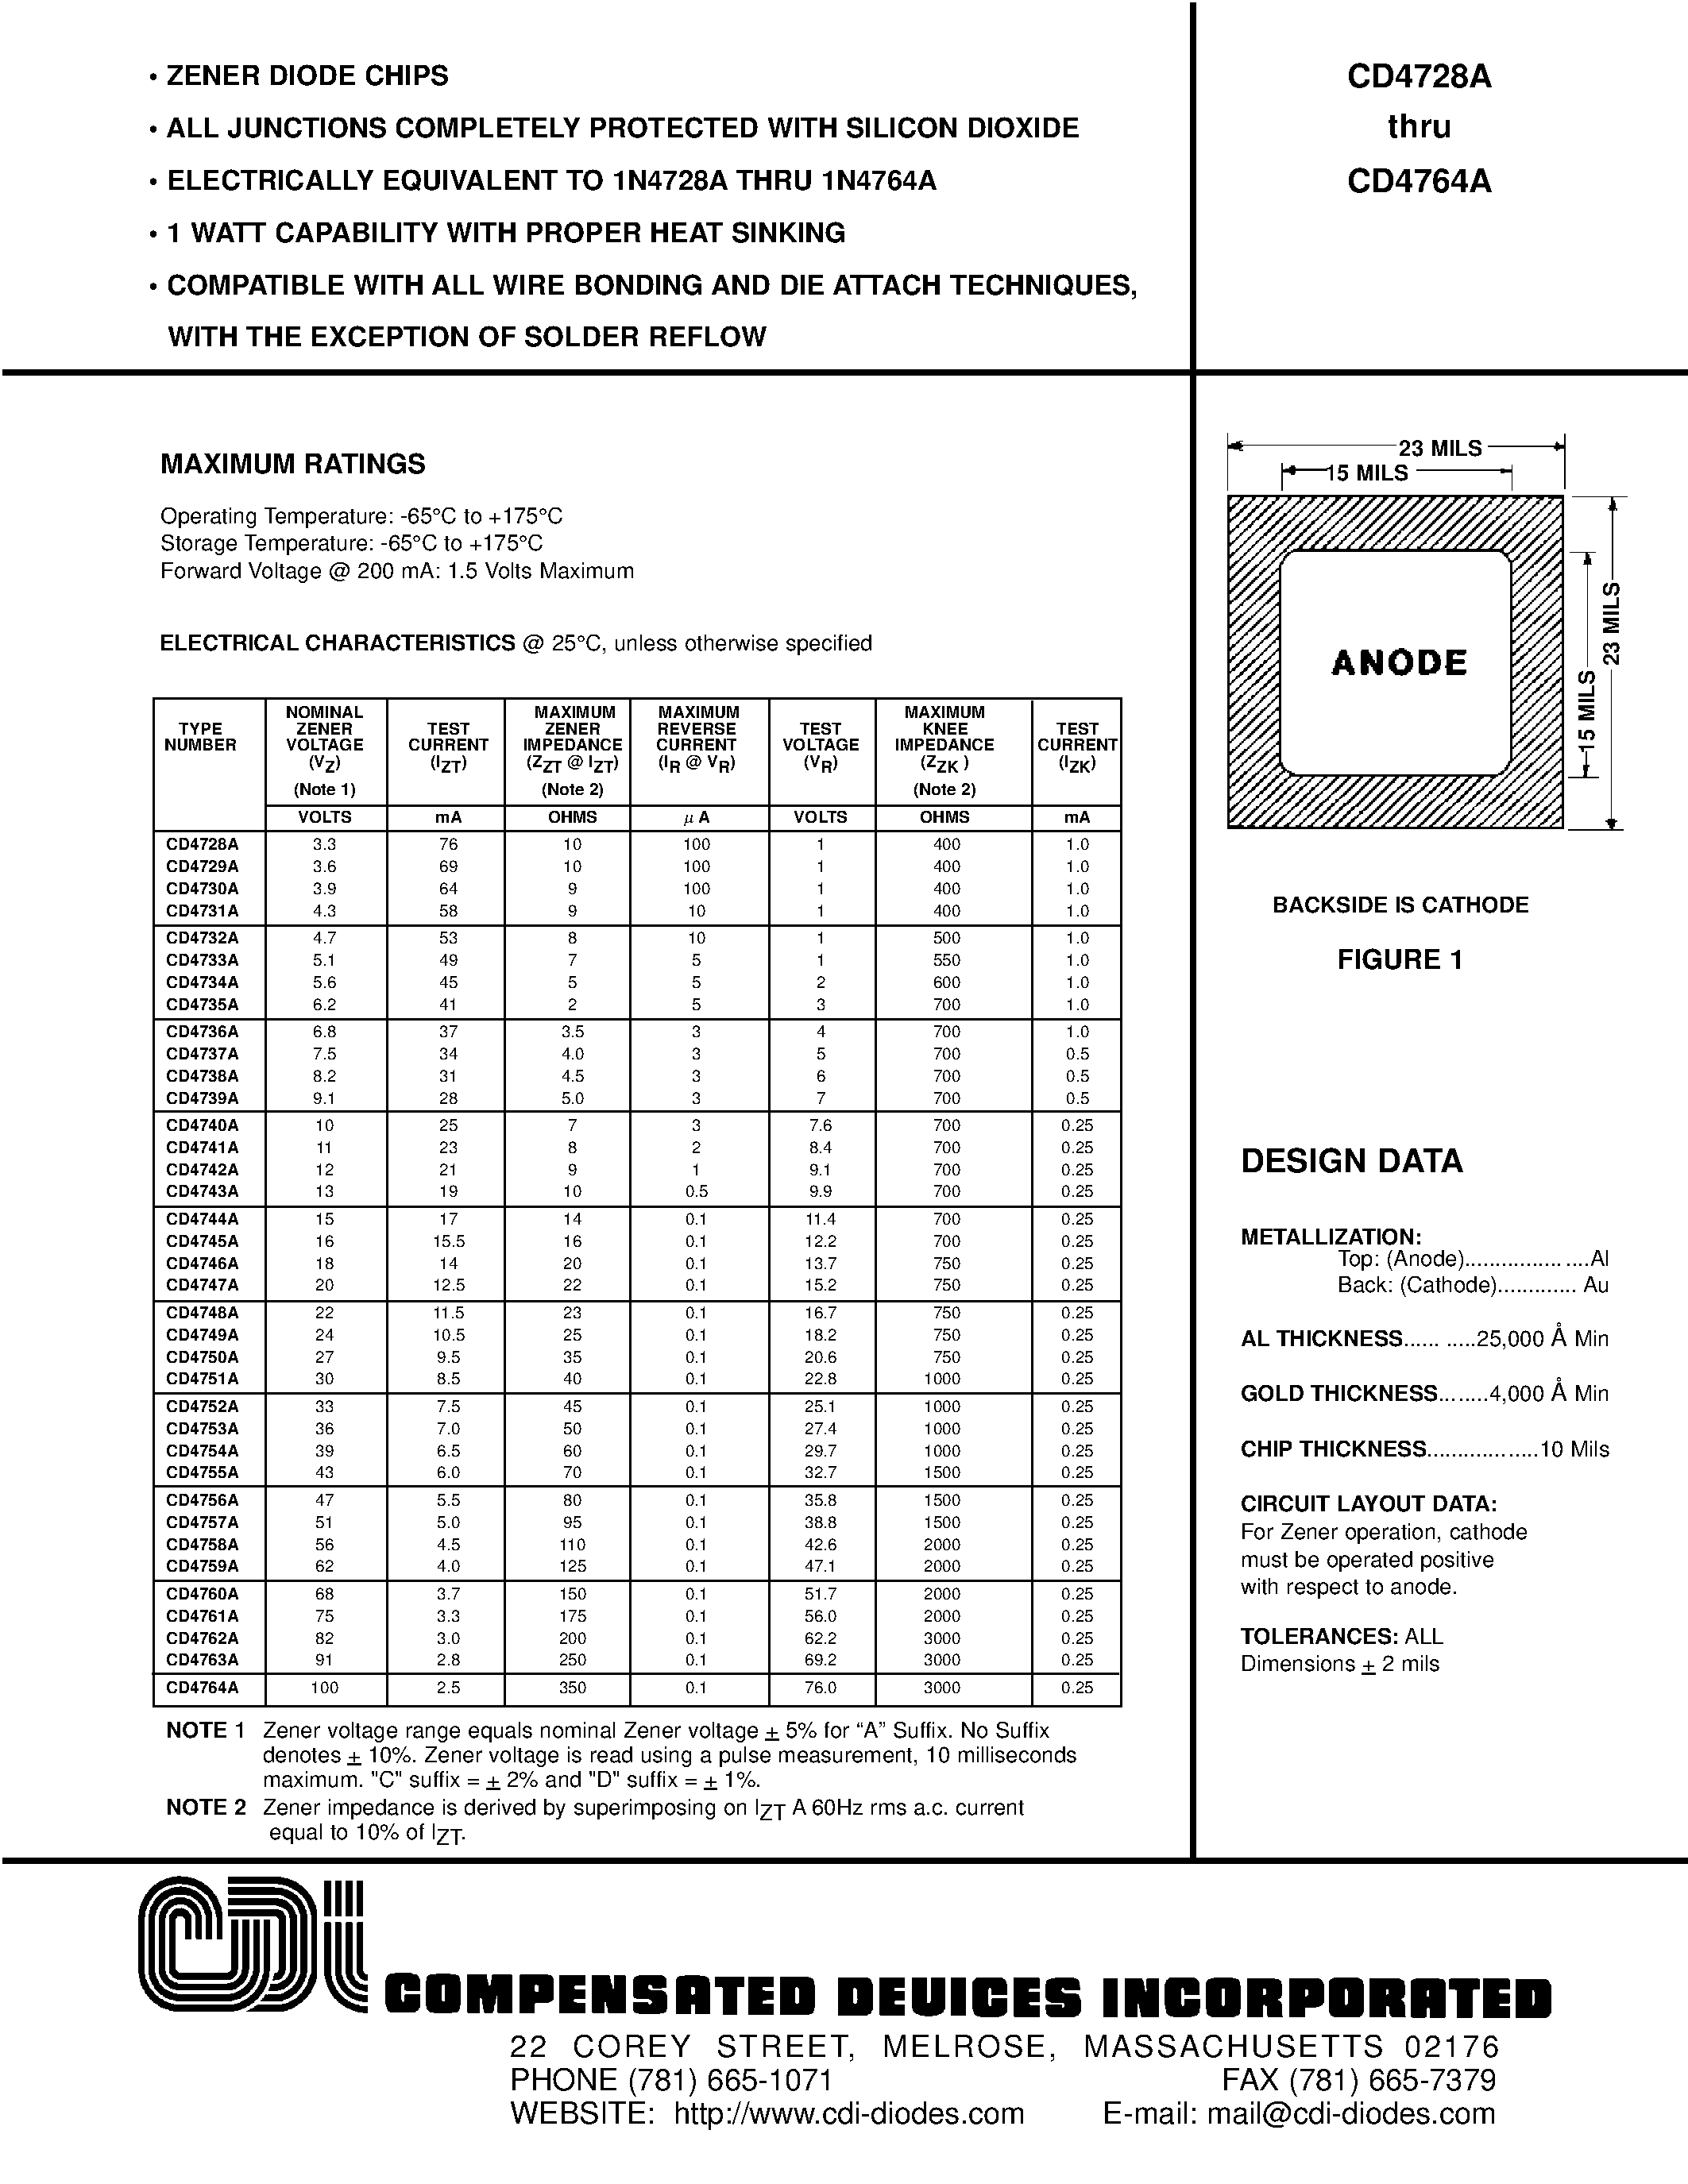 Datasheet CD4758A - ZENER DIODE CHIPS page 1